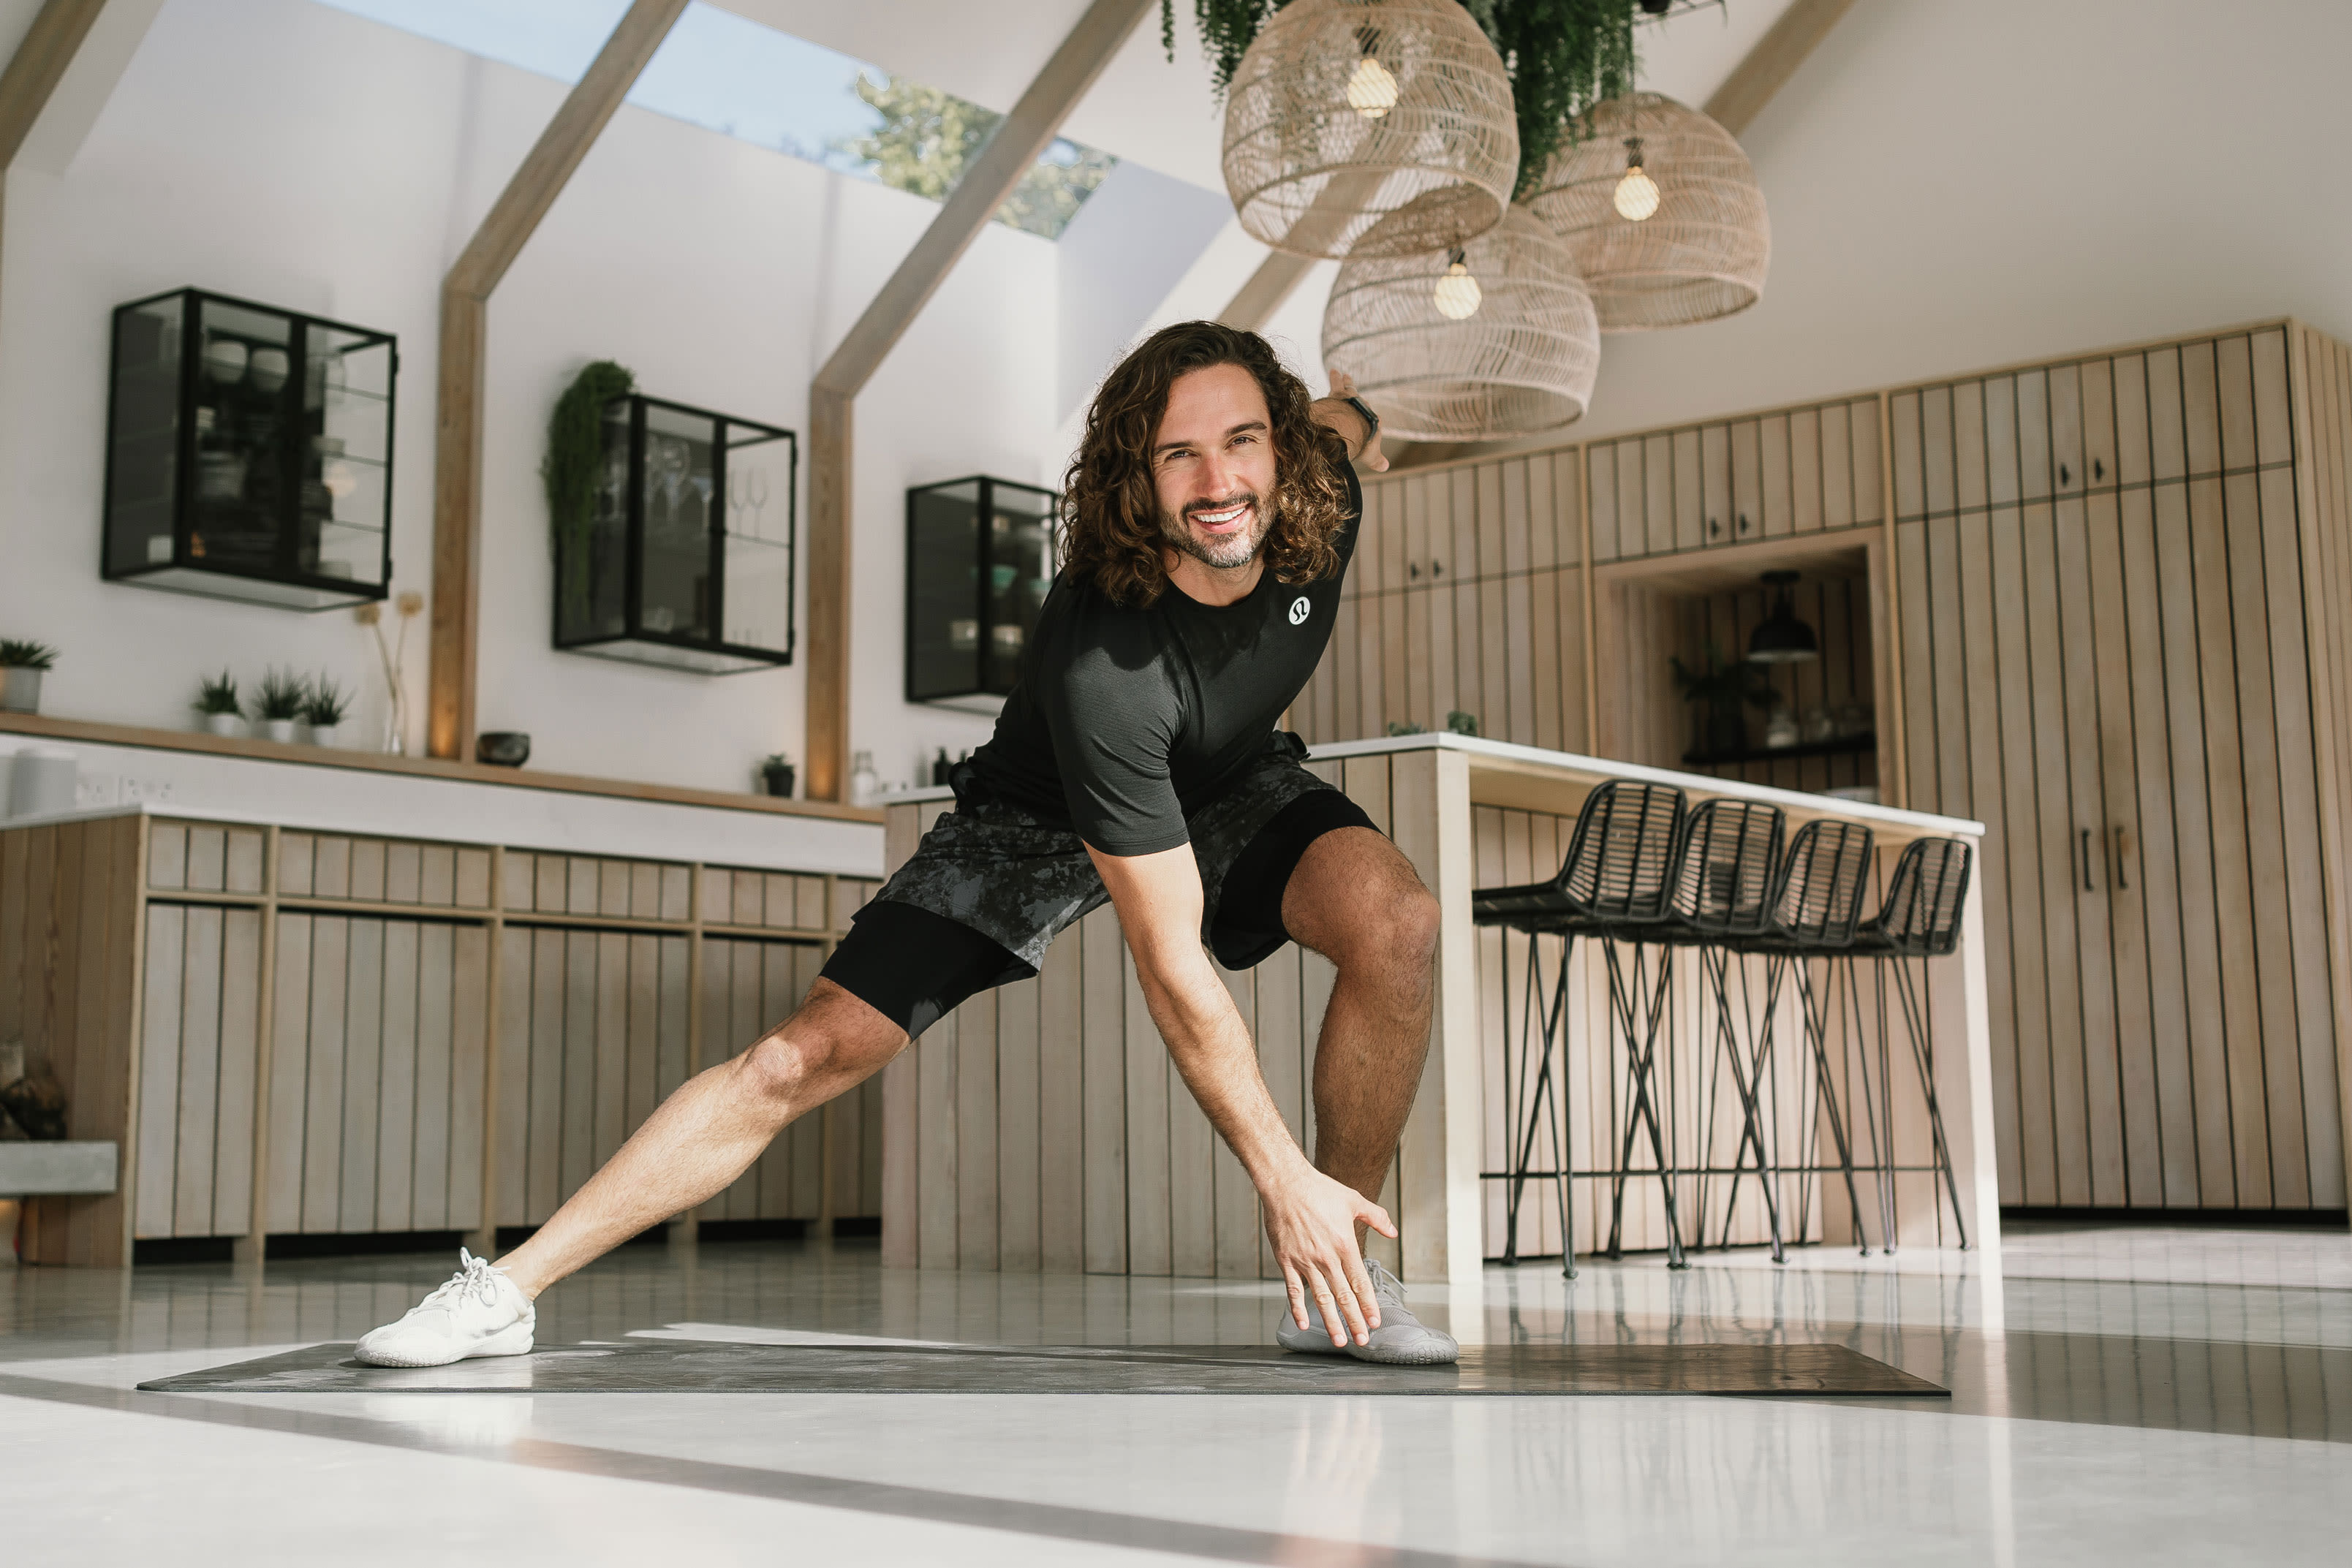 Joe Wicks wearing a black top reaches to the bottom of an exercise mat inside a kitchen.